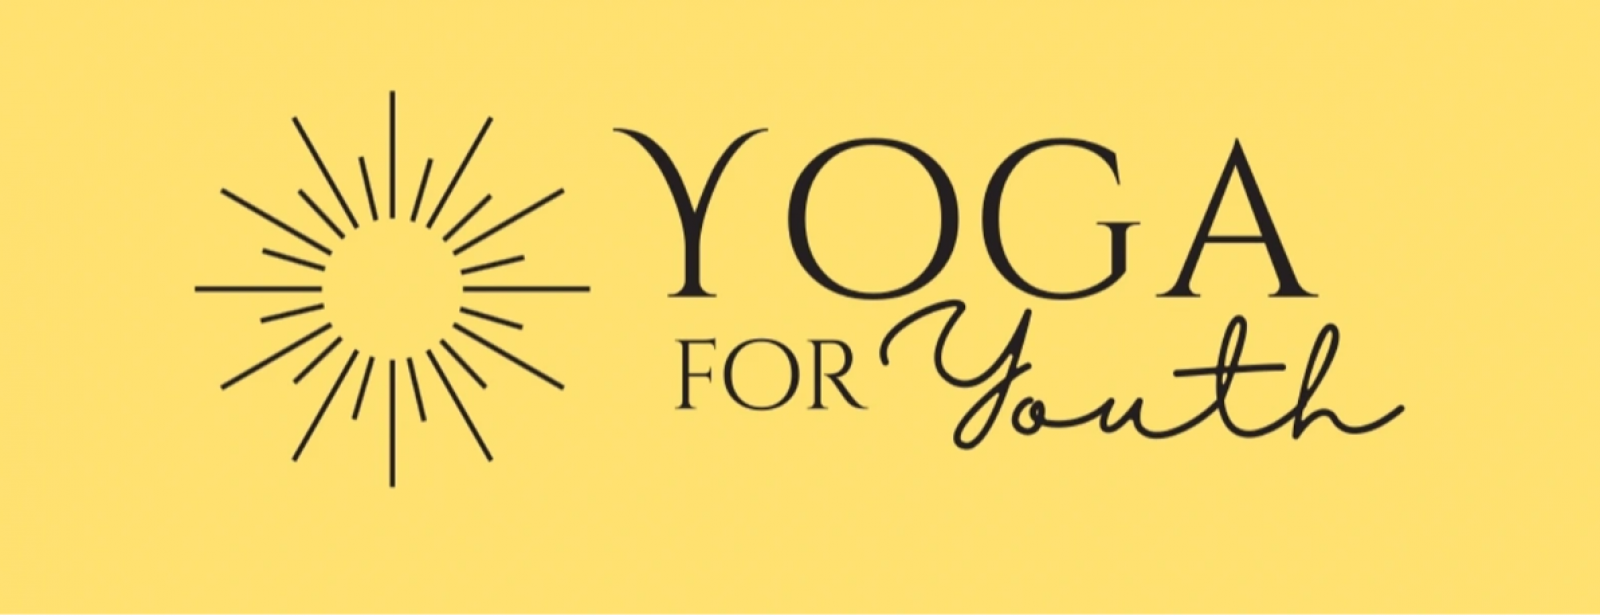 Yoga for Youth banner image